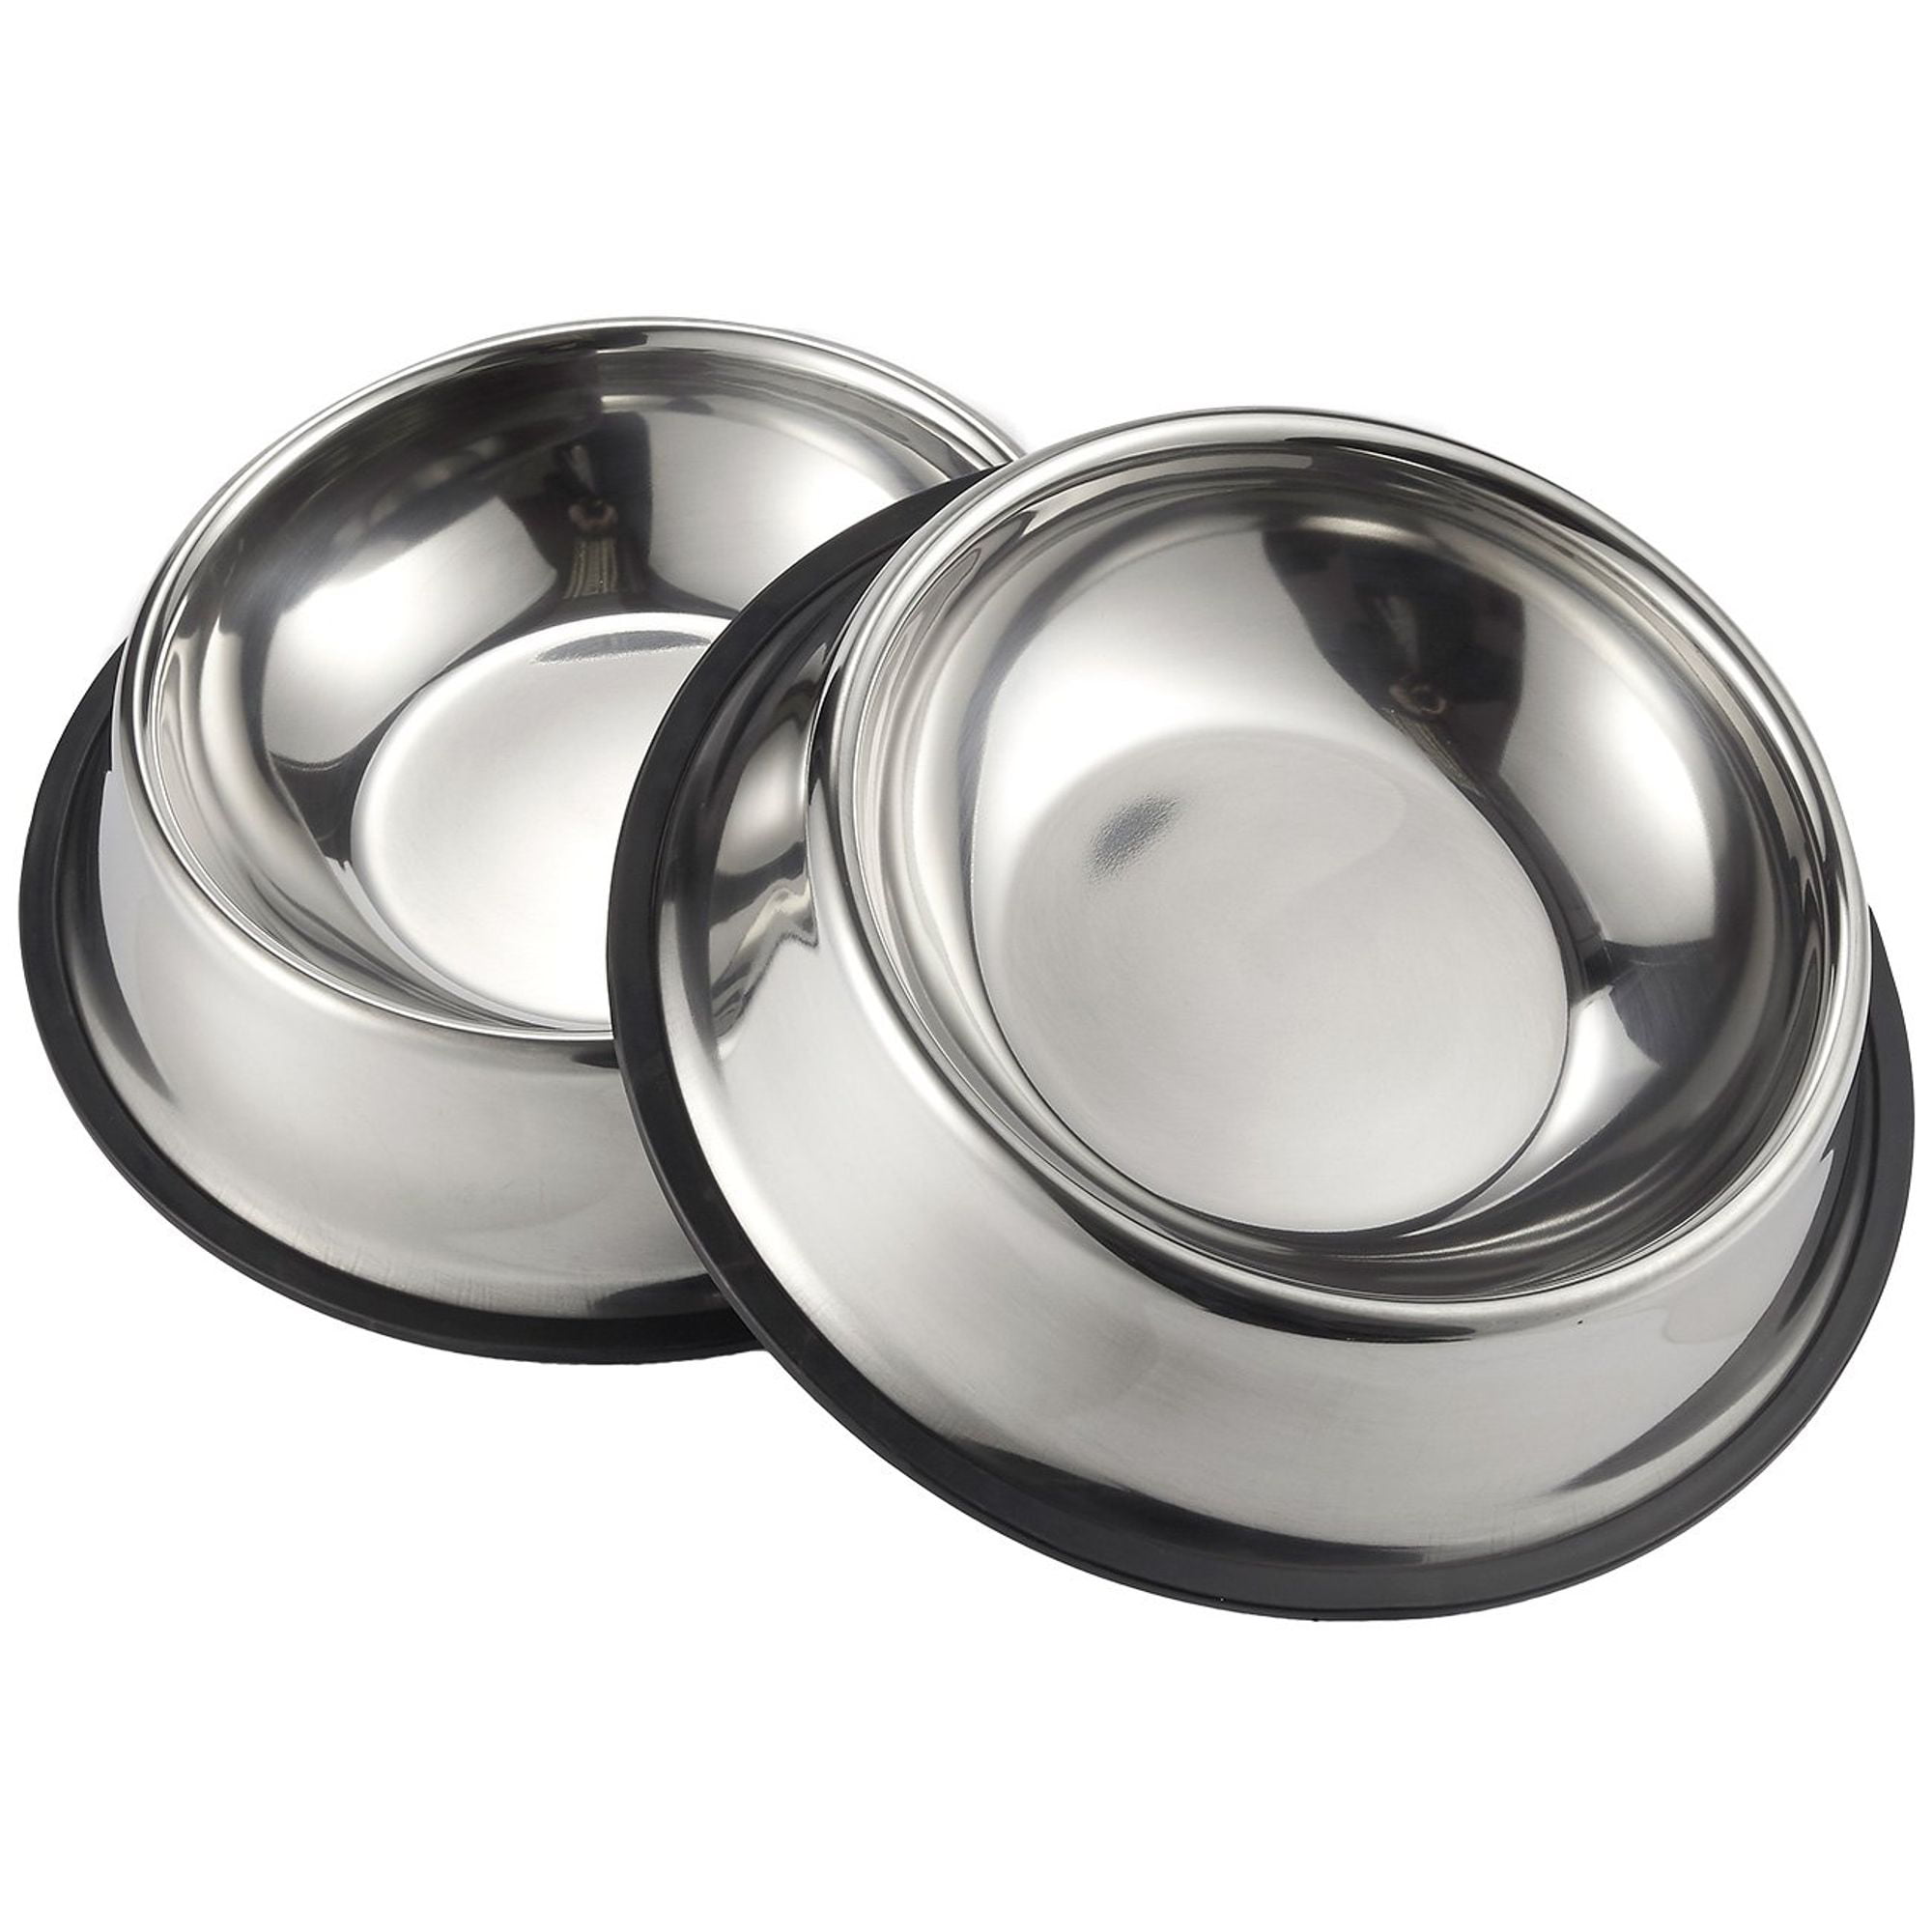 Juvale Stainless Steel Dog Bowls - Set of 2 Large Pet Food and Water Large Stainless Steel Dog Water Bowl